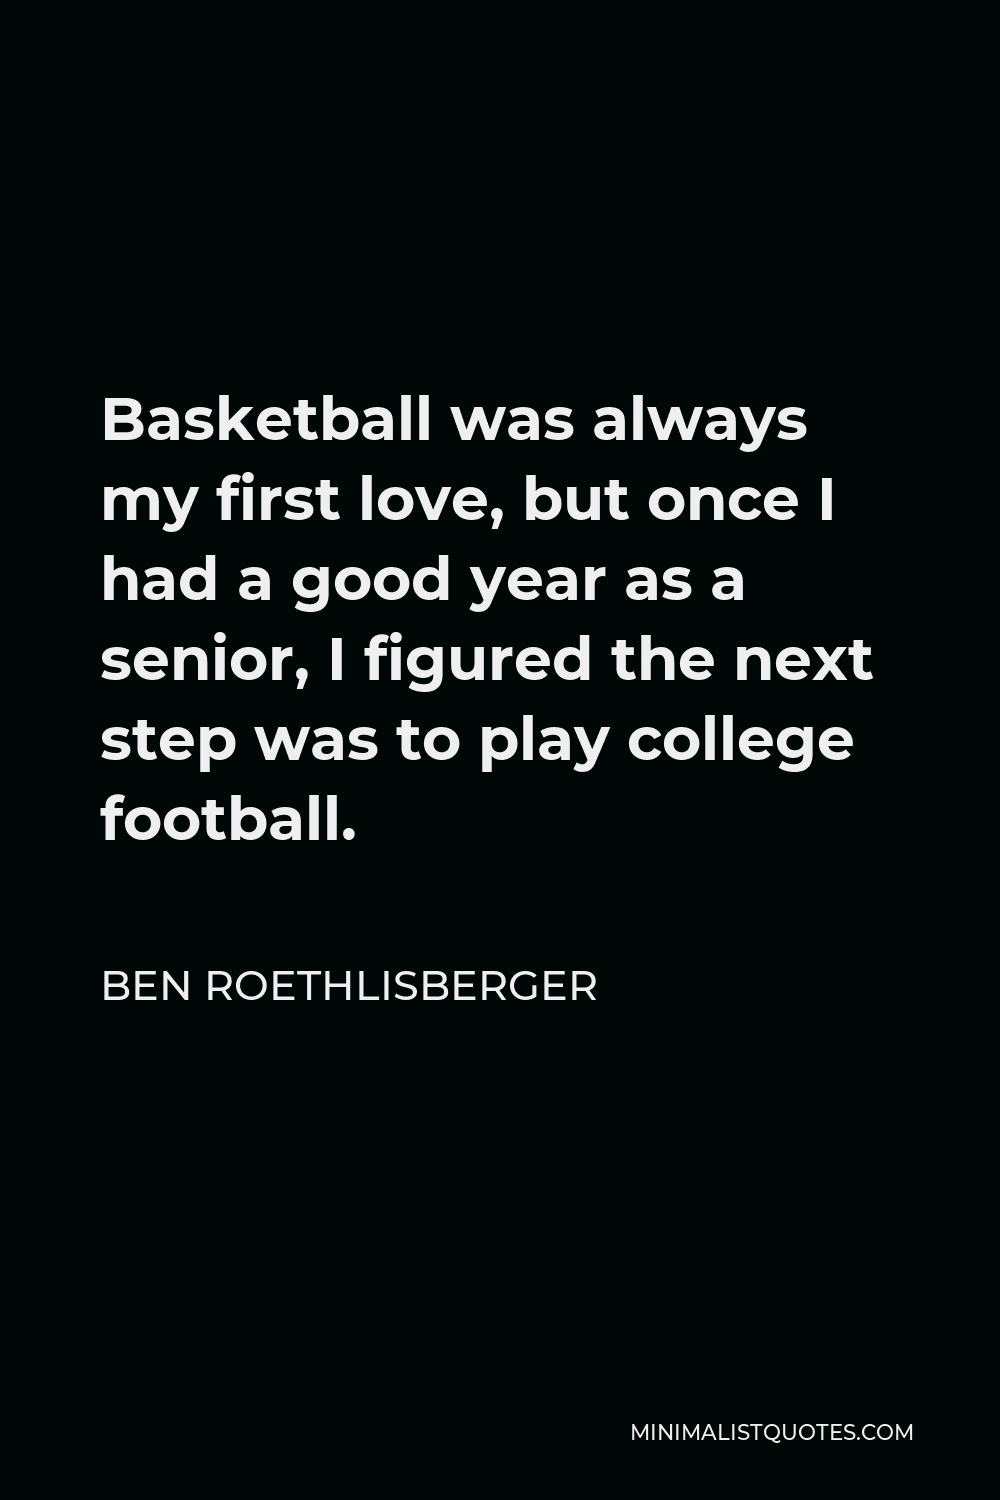 Ben Roethlisberger Quote - Basketball was always my first love, but once I had a good year as a senior, I figured the next step was to play college football.